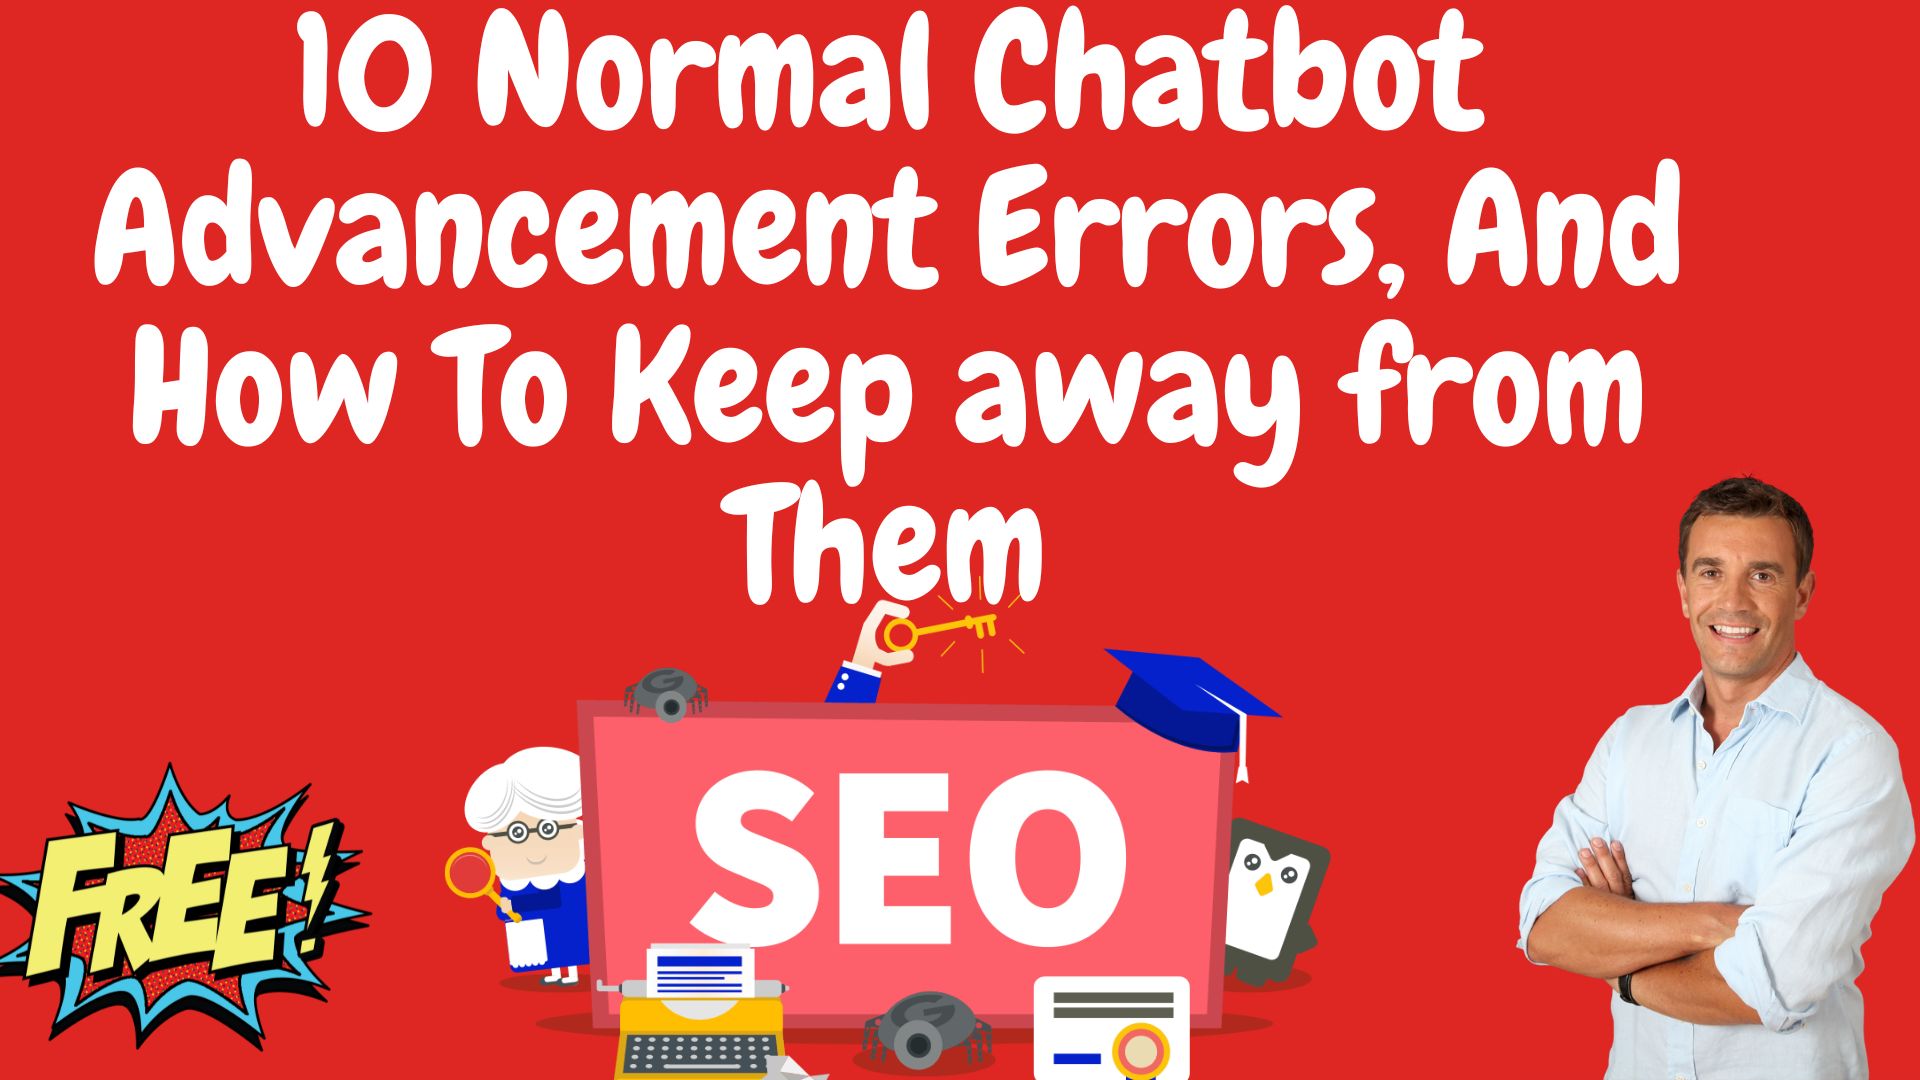 10 Normal Chatbot Advancement Errors, And How To Keep Away From Them